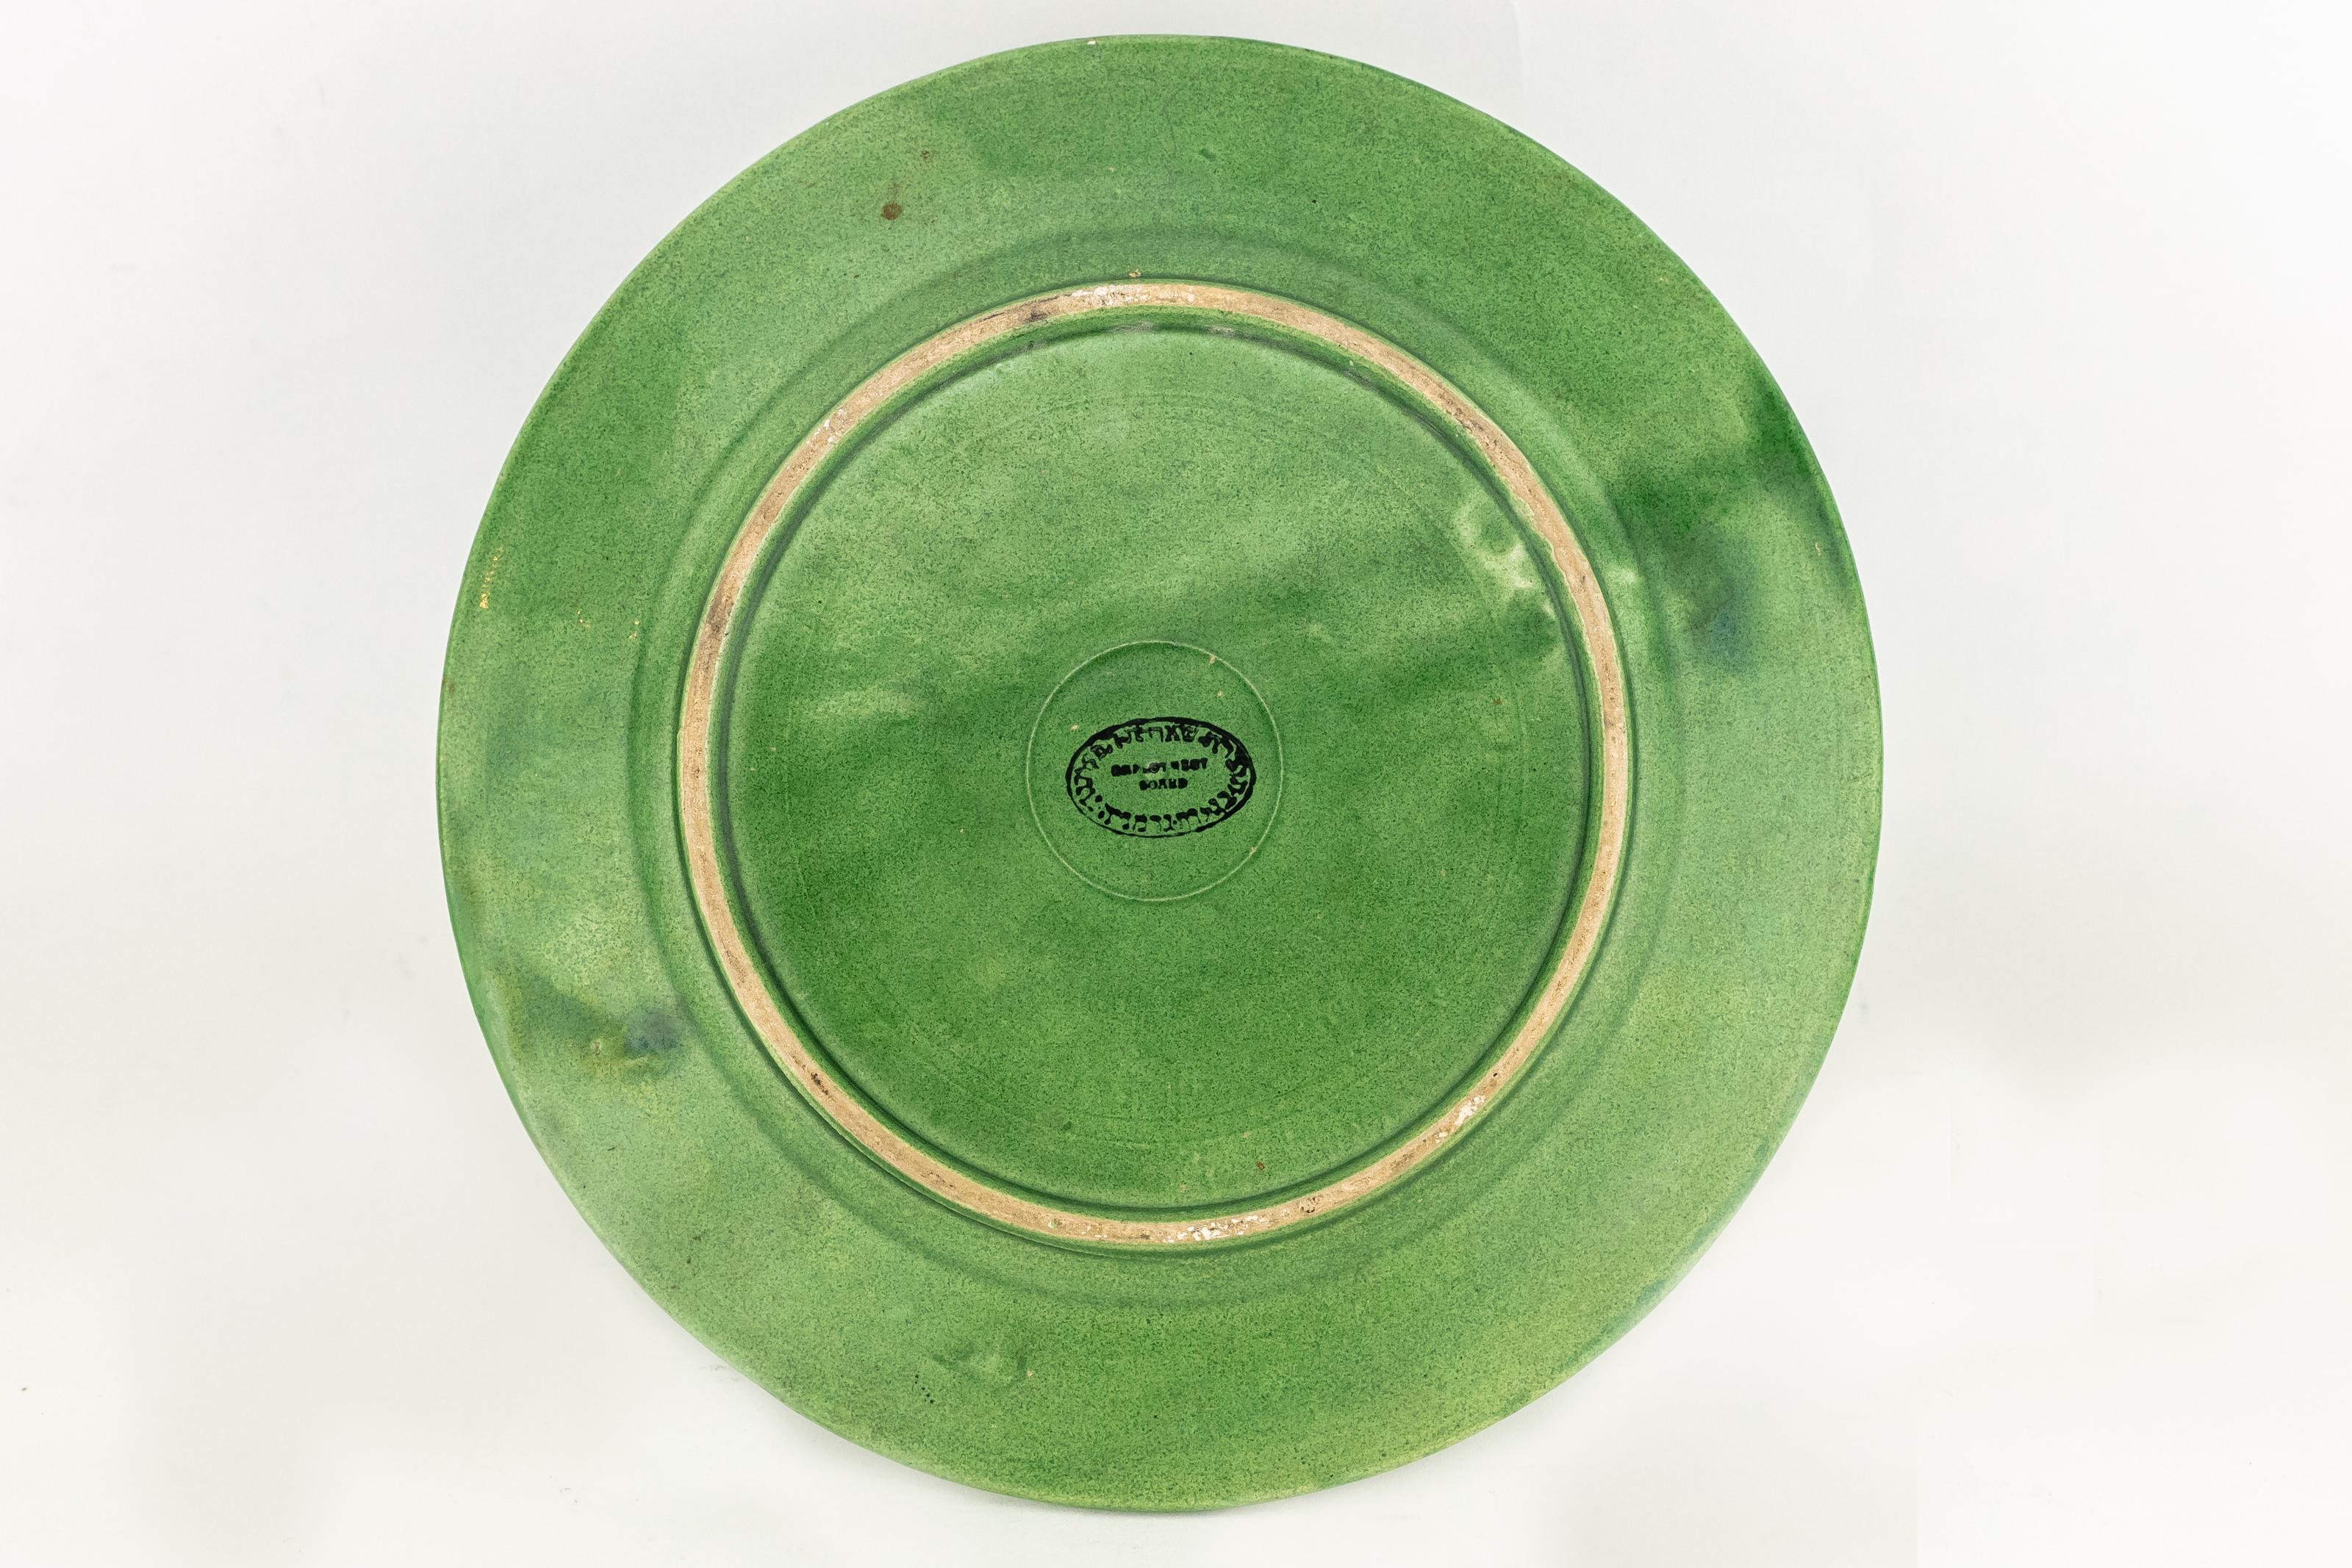 Post World War II Green Gazed Earthenware Passover Seder Plate In Good Condition For Sale In New York, NY